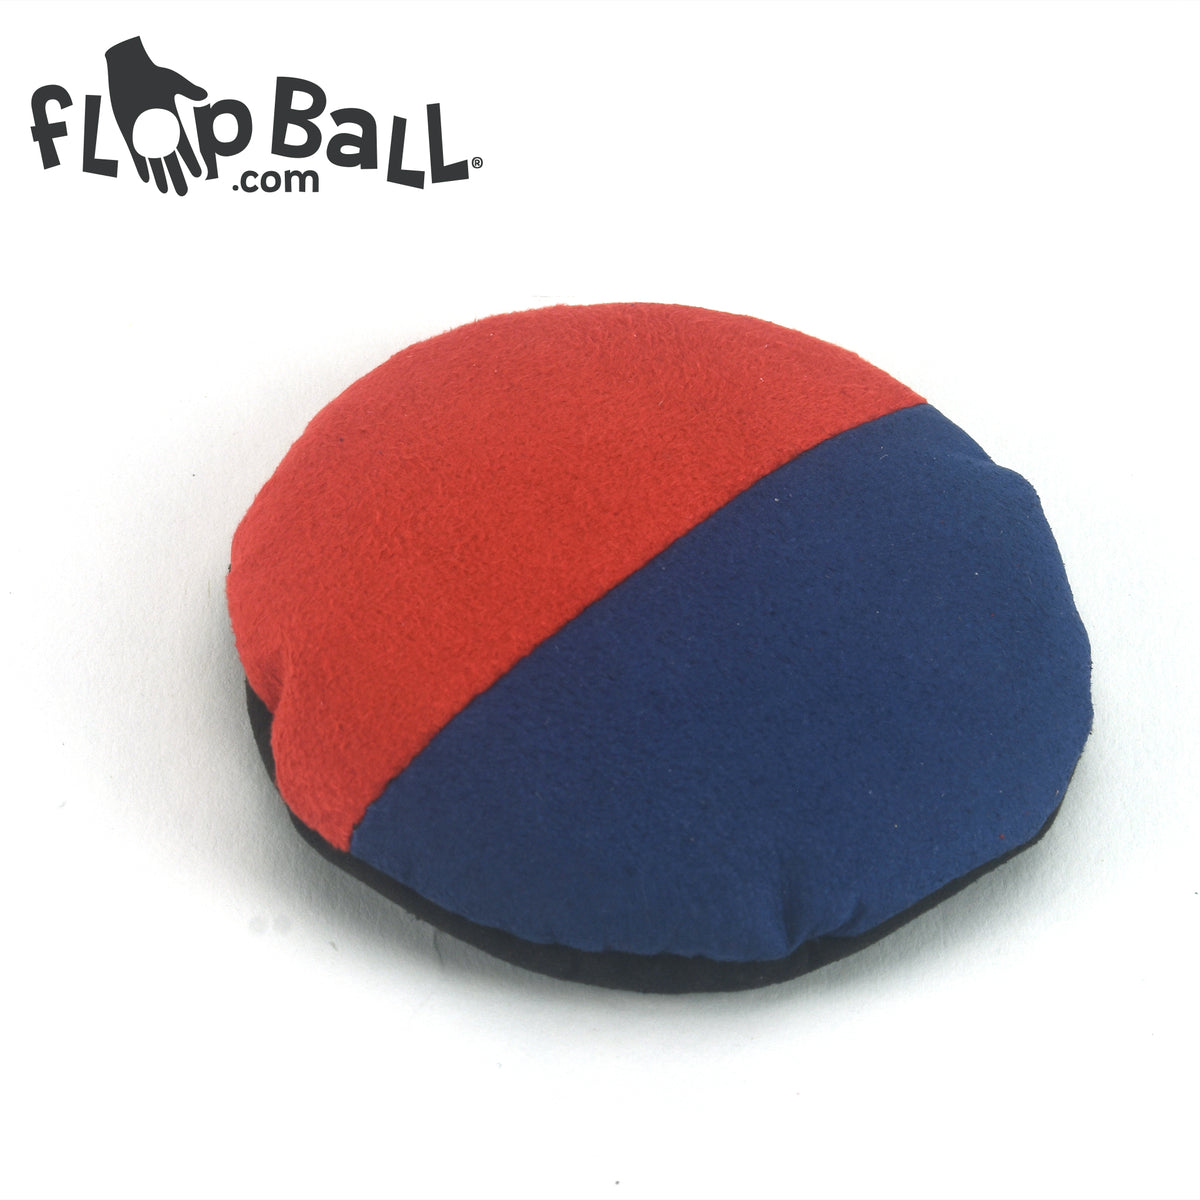 Pop Ball - FFSGT40029 - IdeaStage Promotional Products